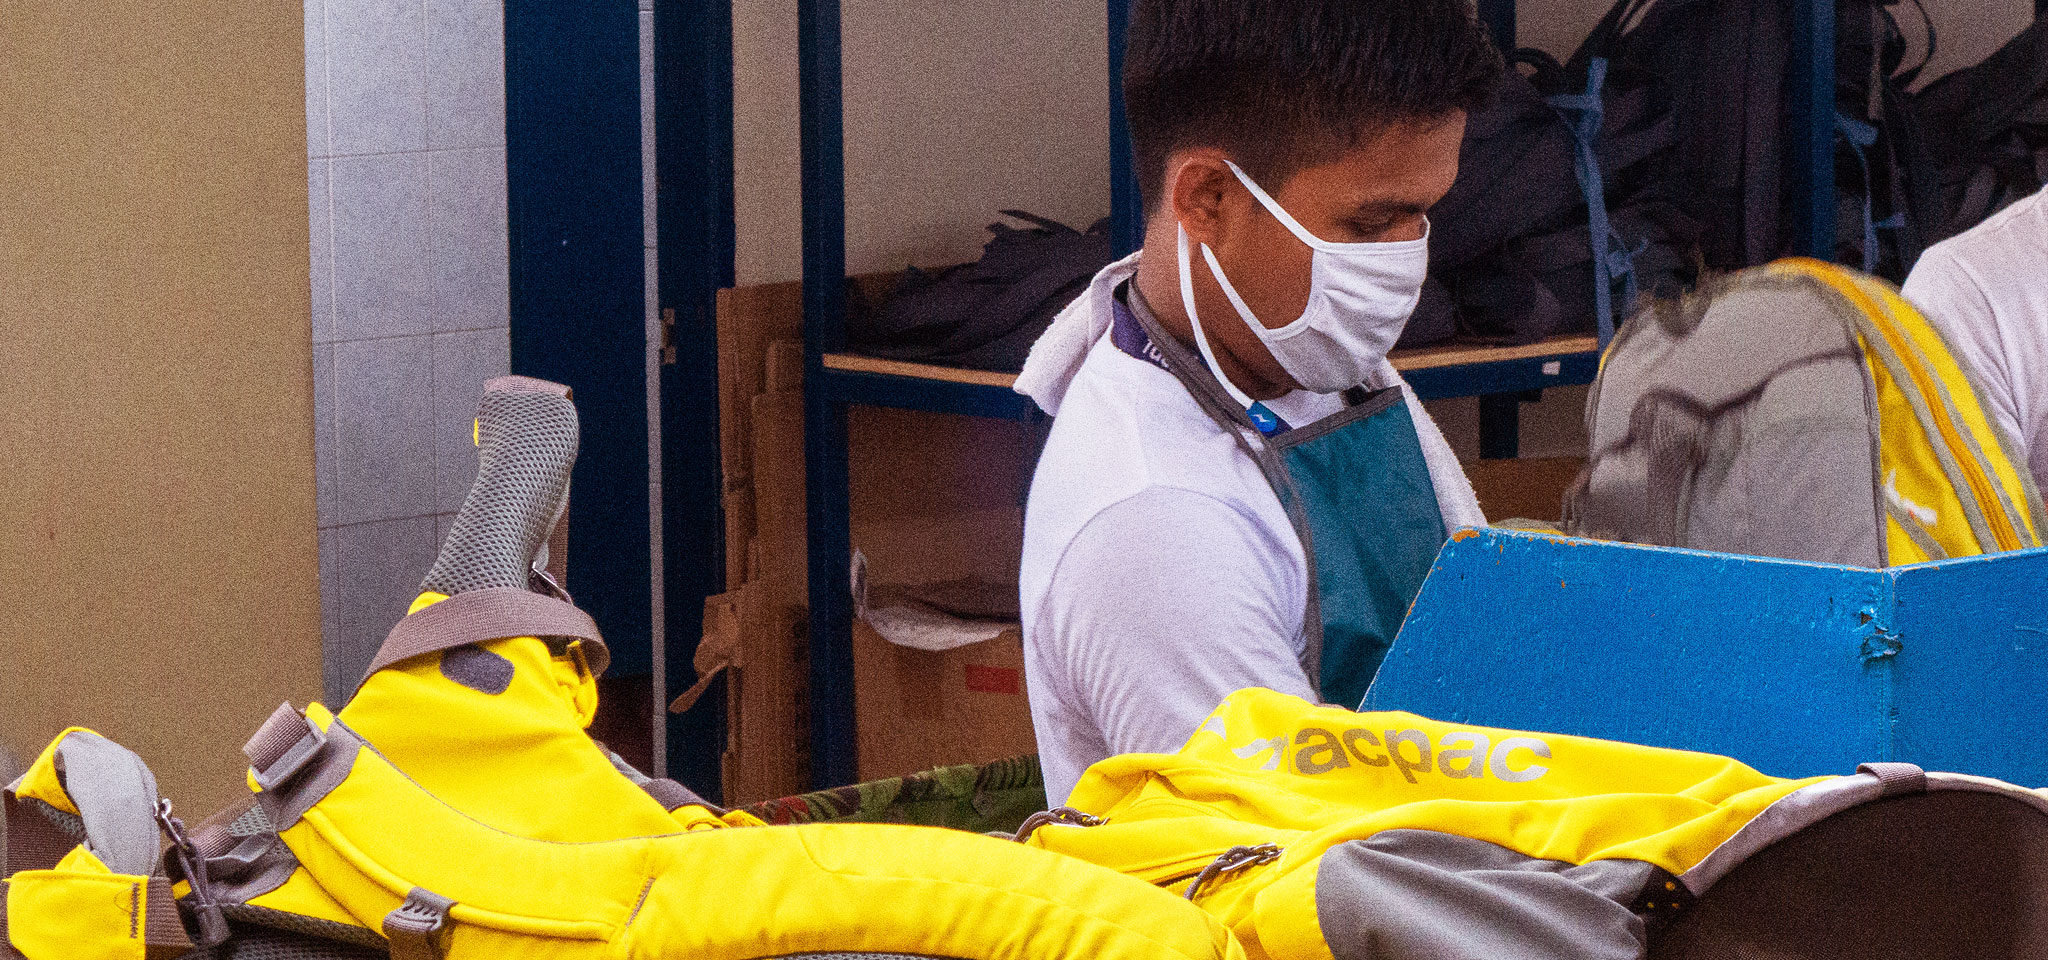 Man wearing facemask inspecting a yellow macpac pac at a factory.